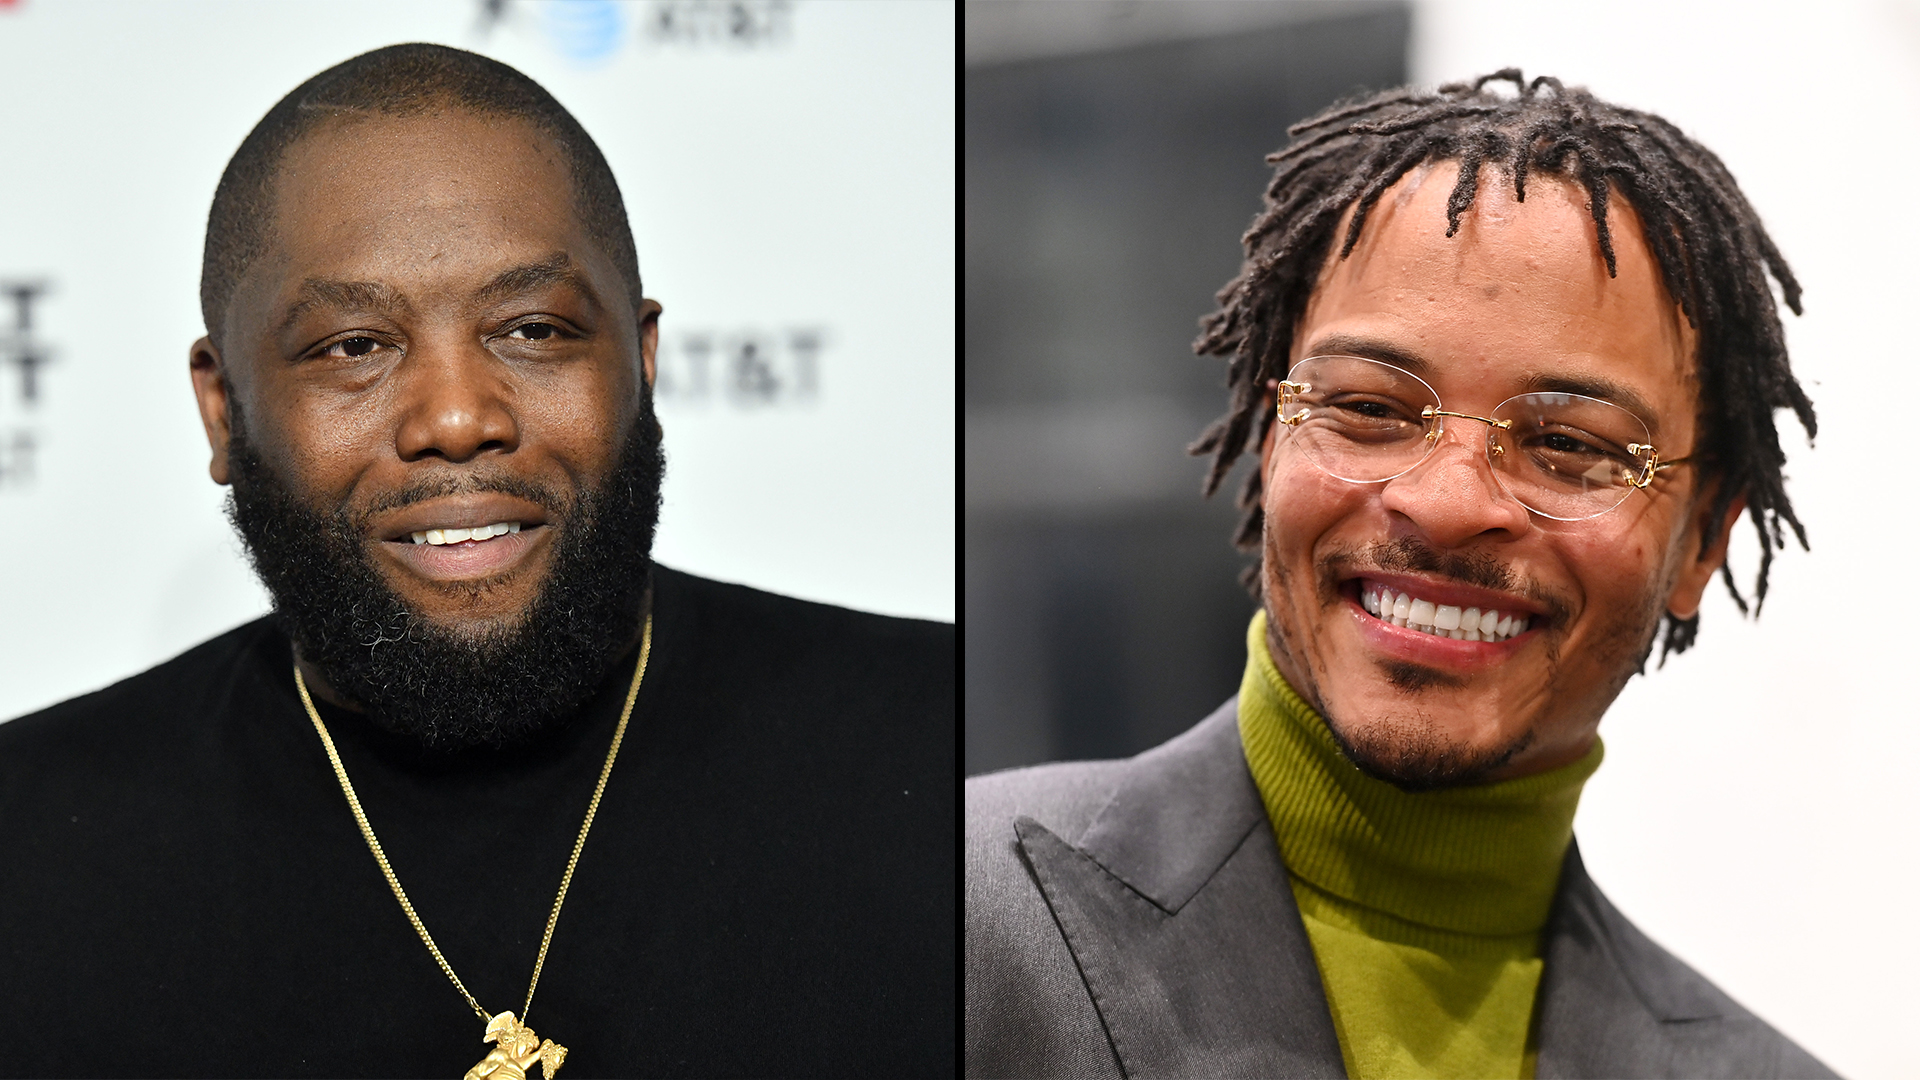 Killer Mike And T.I. Make Moves To Re-Open Historic Atlanta Restaurant Bankhead Seafood